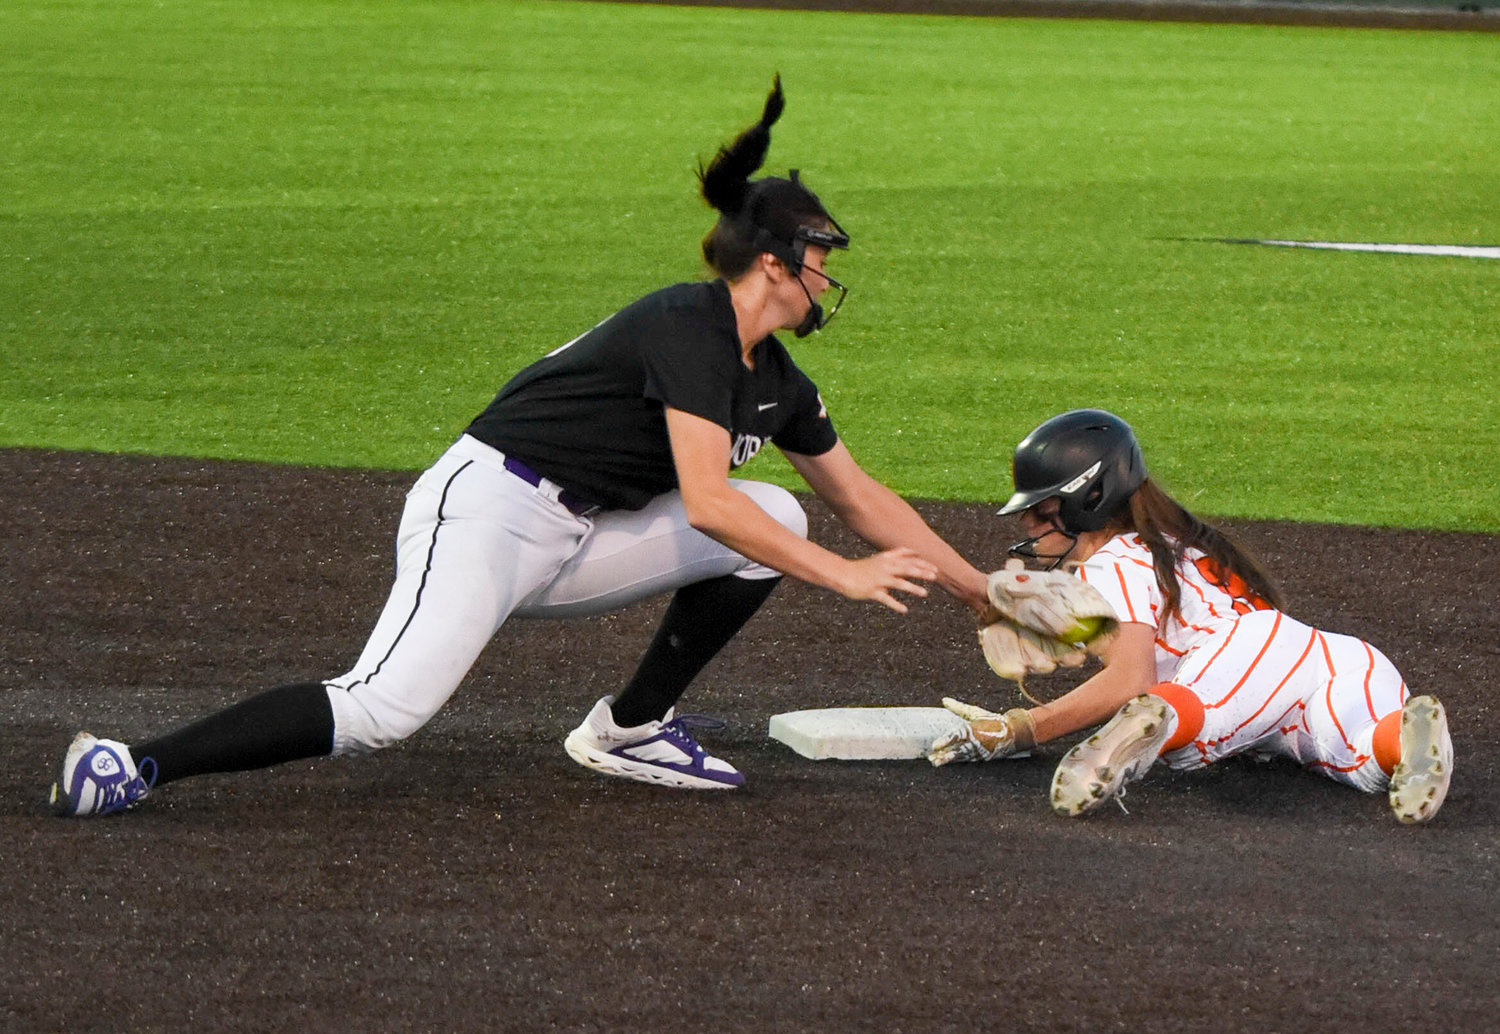 Senior Reagan Davis slides safe into second base Friday, March 24, against the Granbury Pirates. The Ladycats went on to dominate the Pirates 10-1.